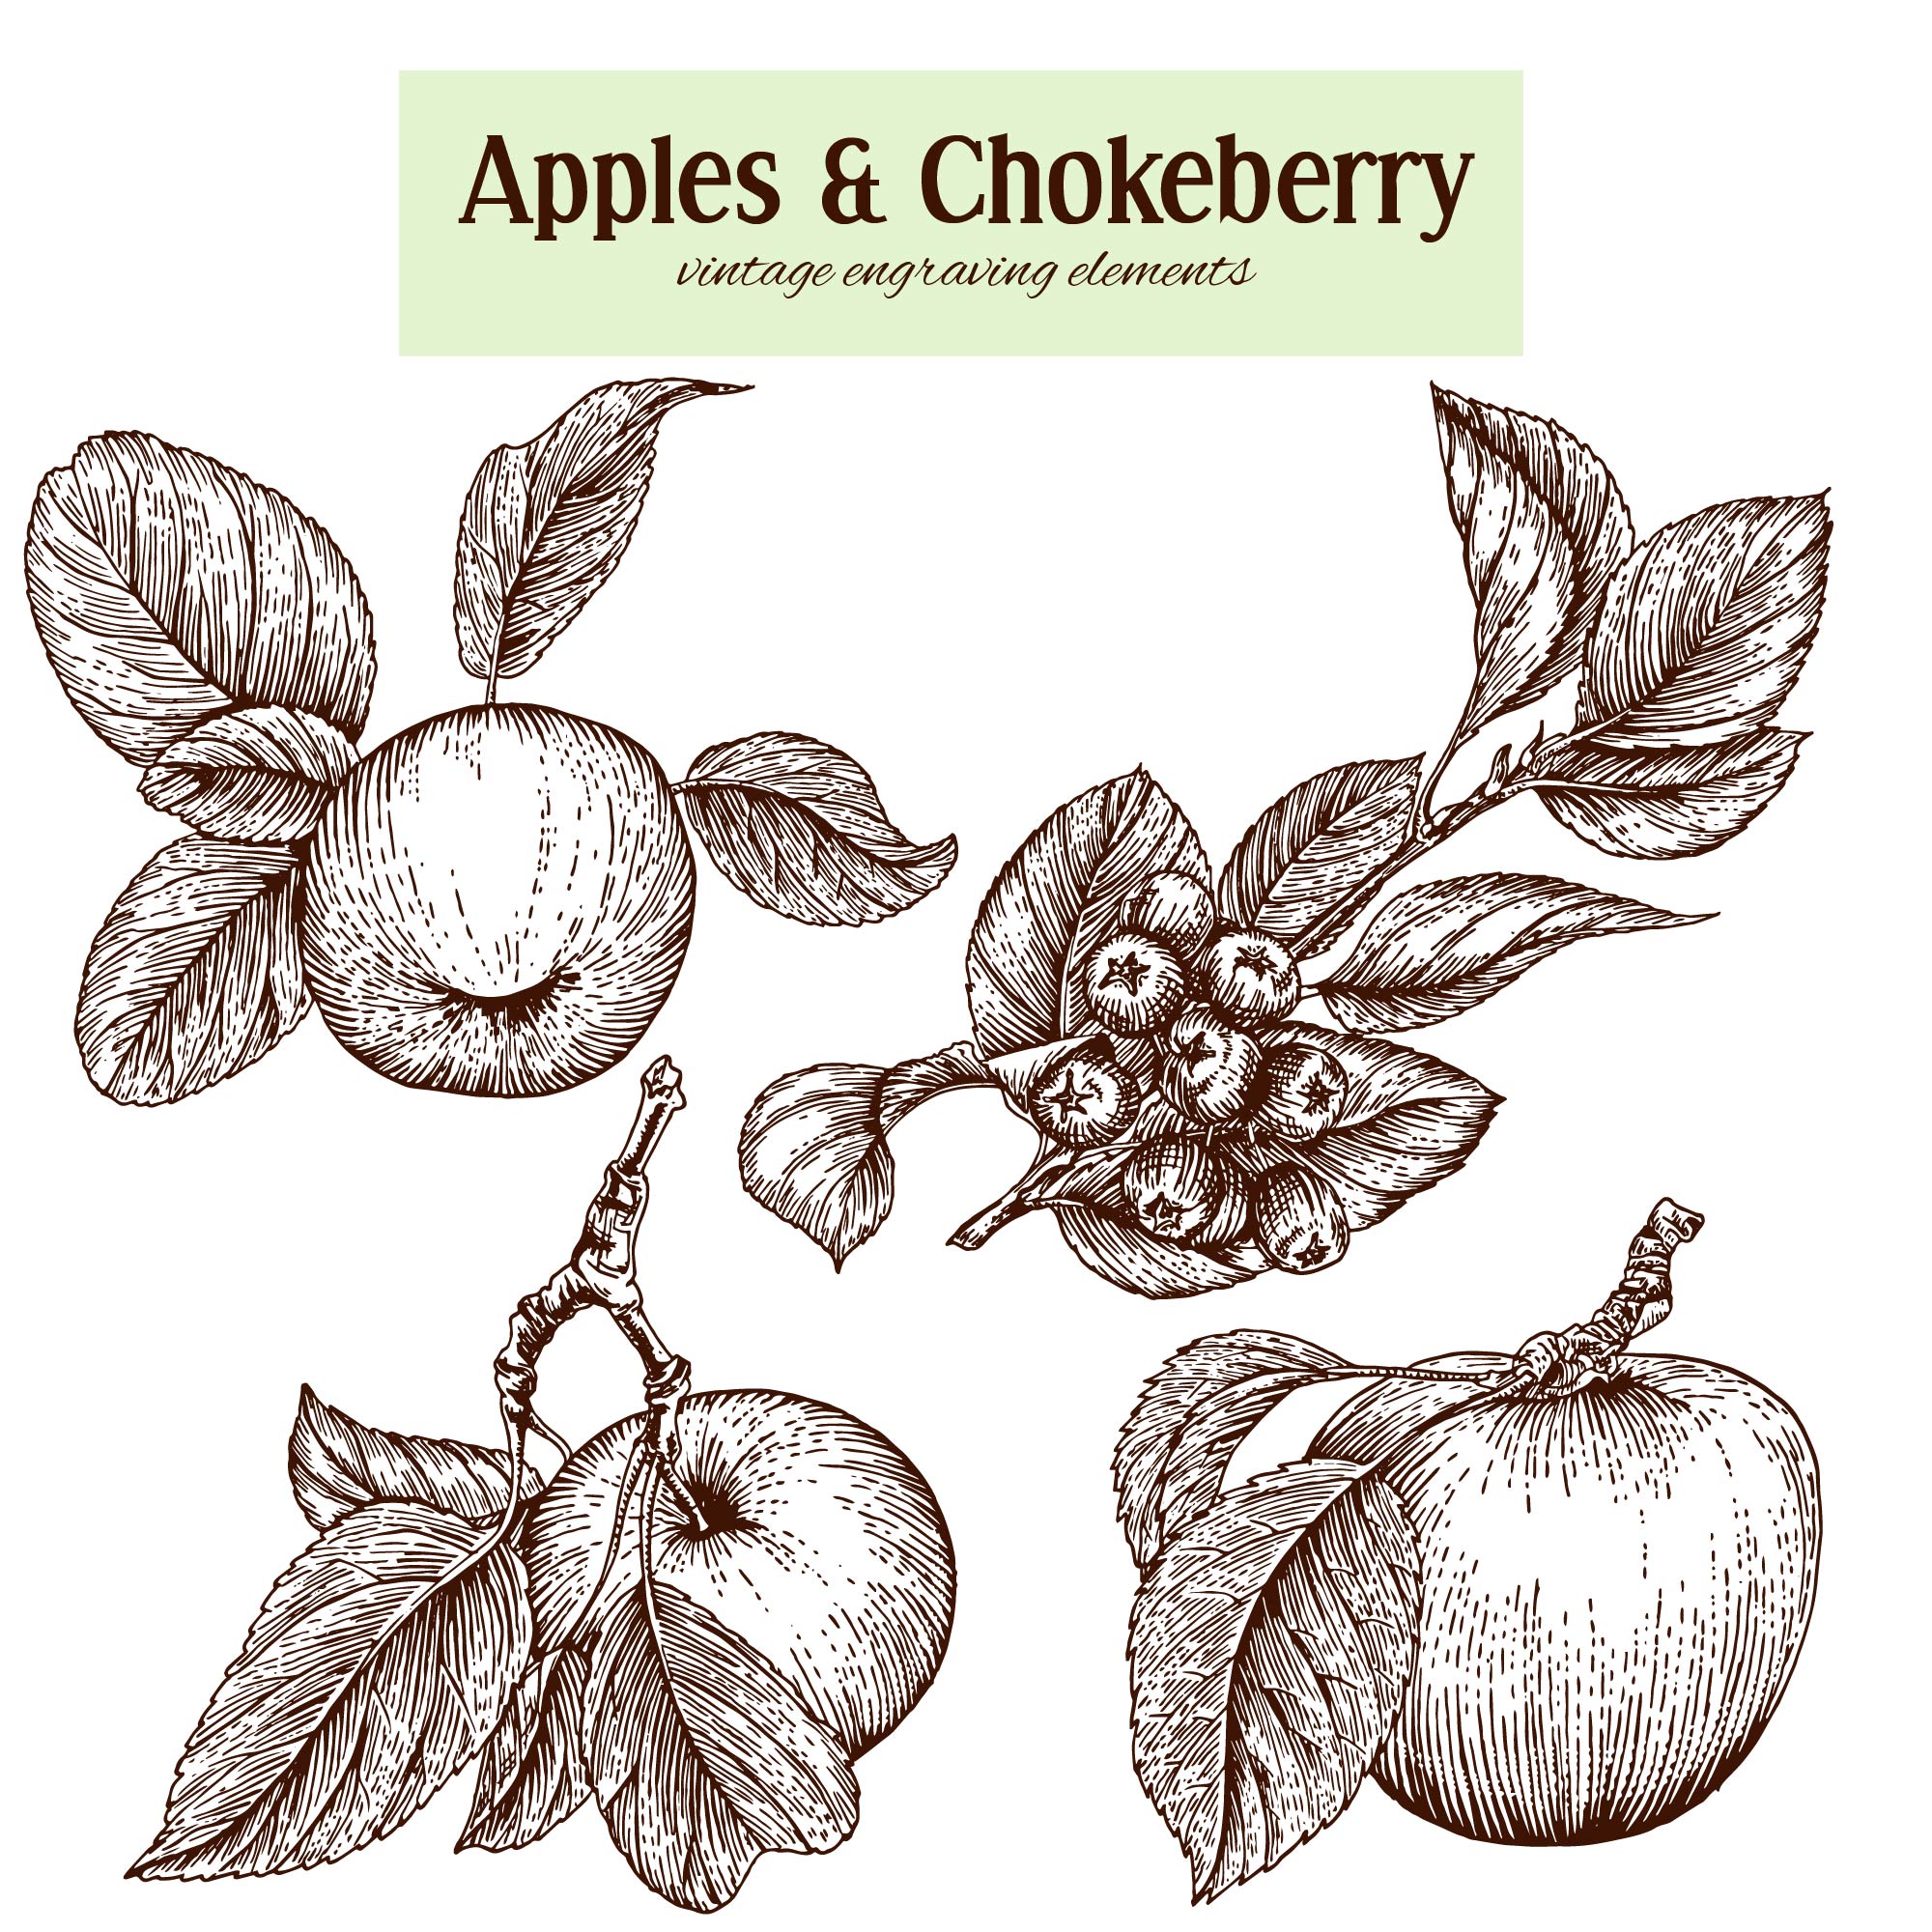 Apples and chokeberry engraving